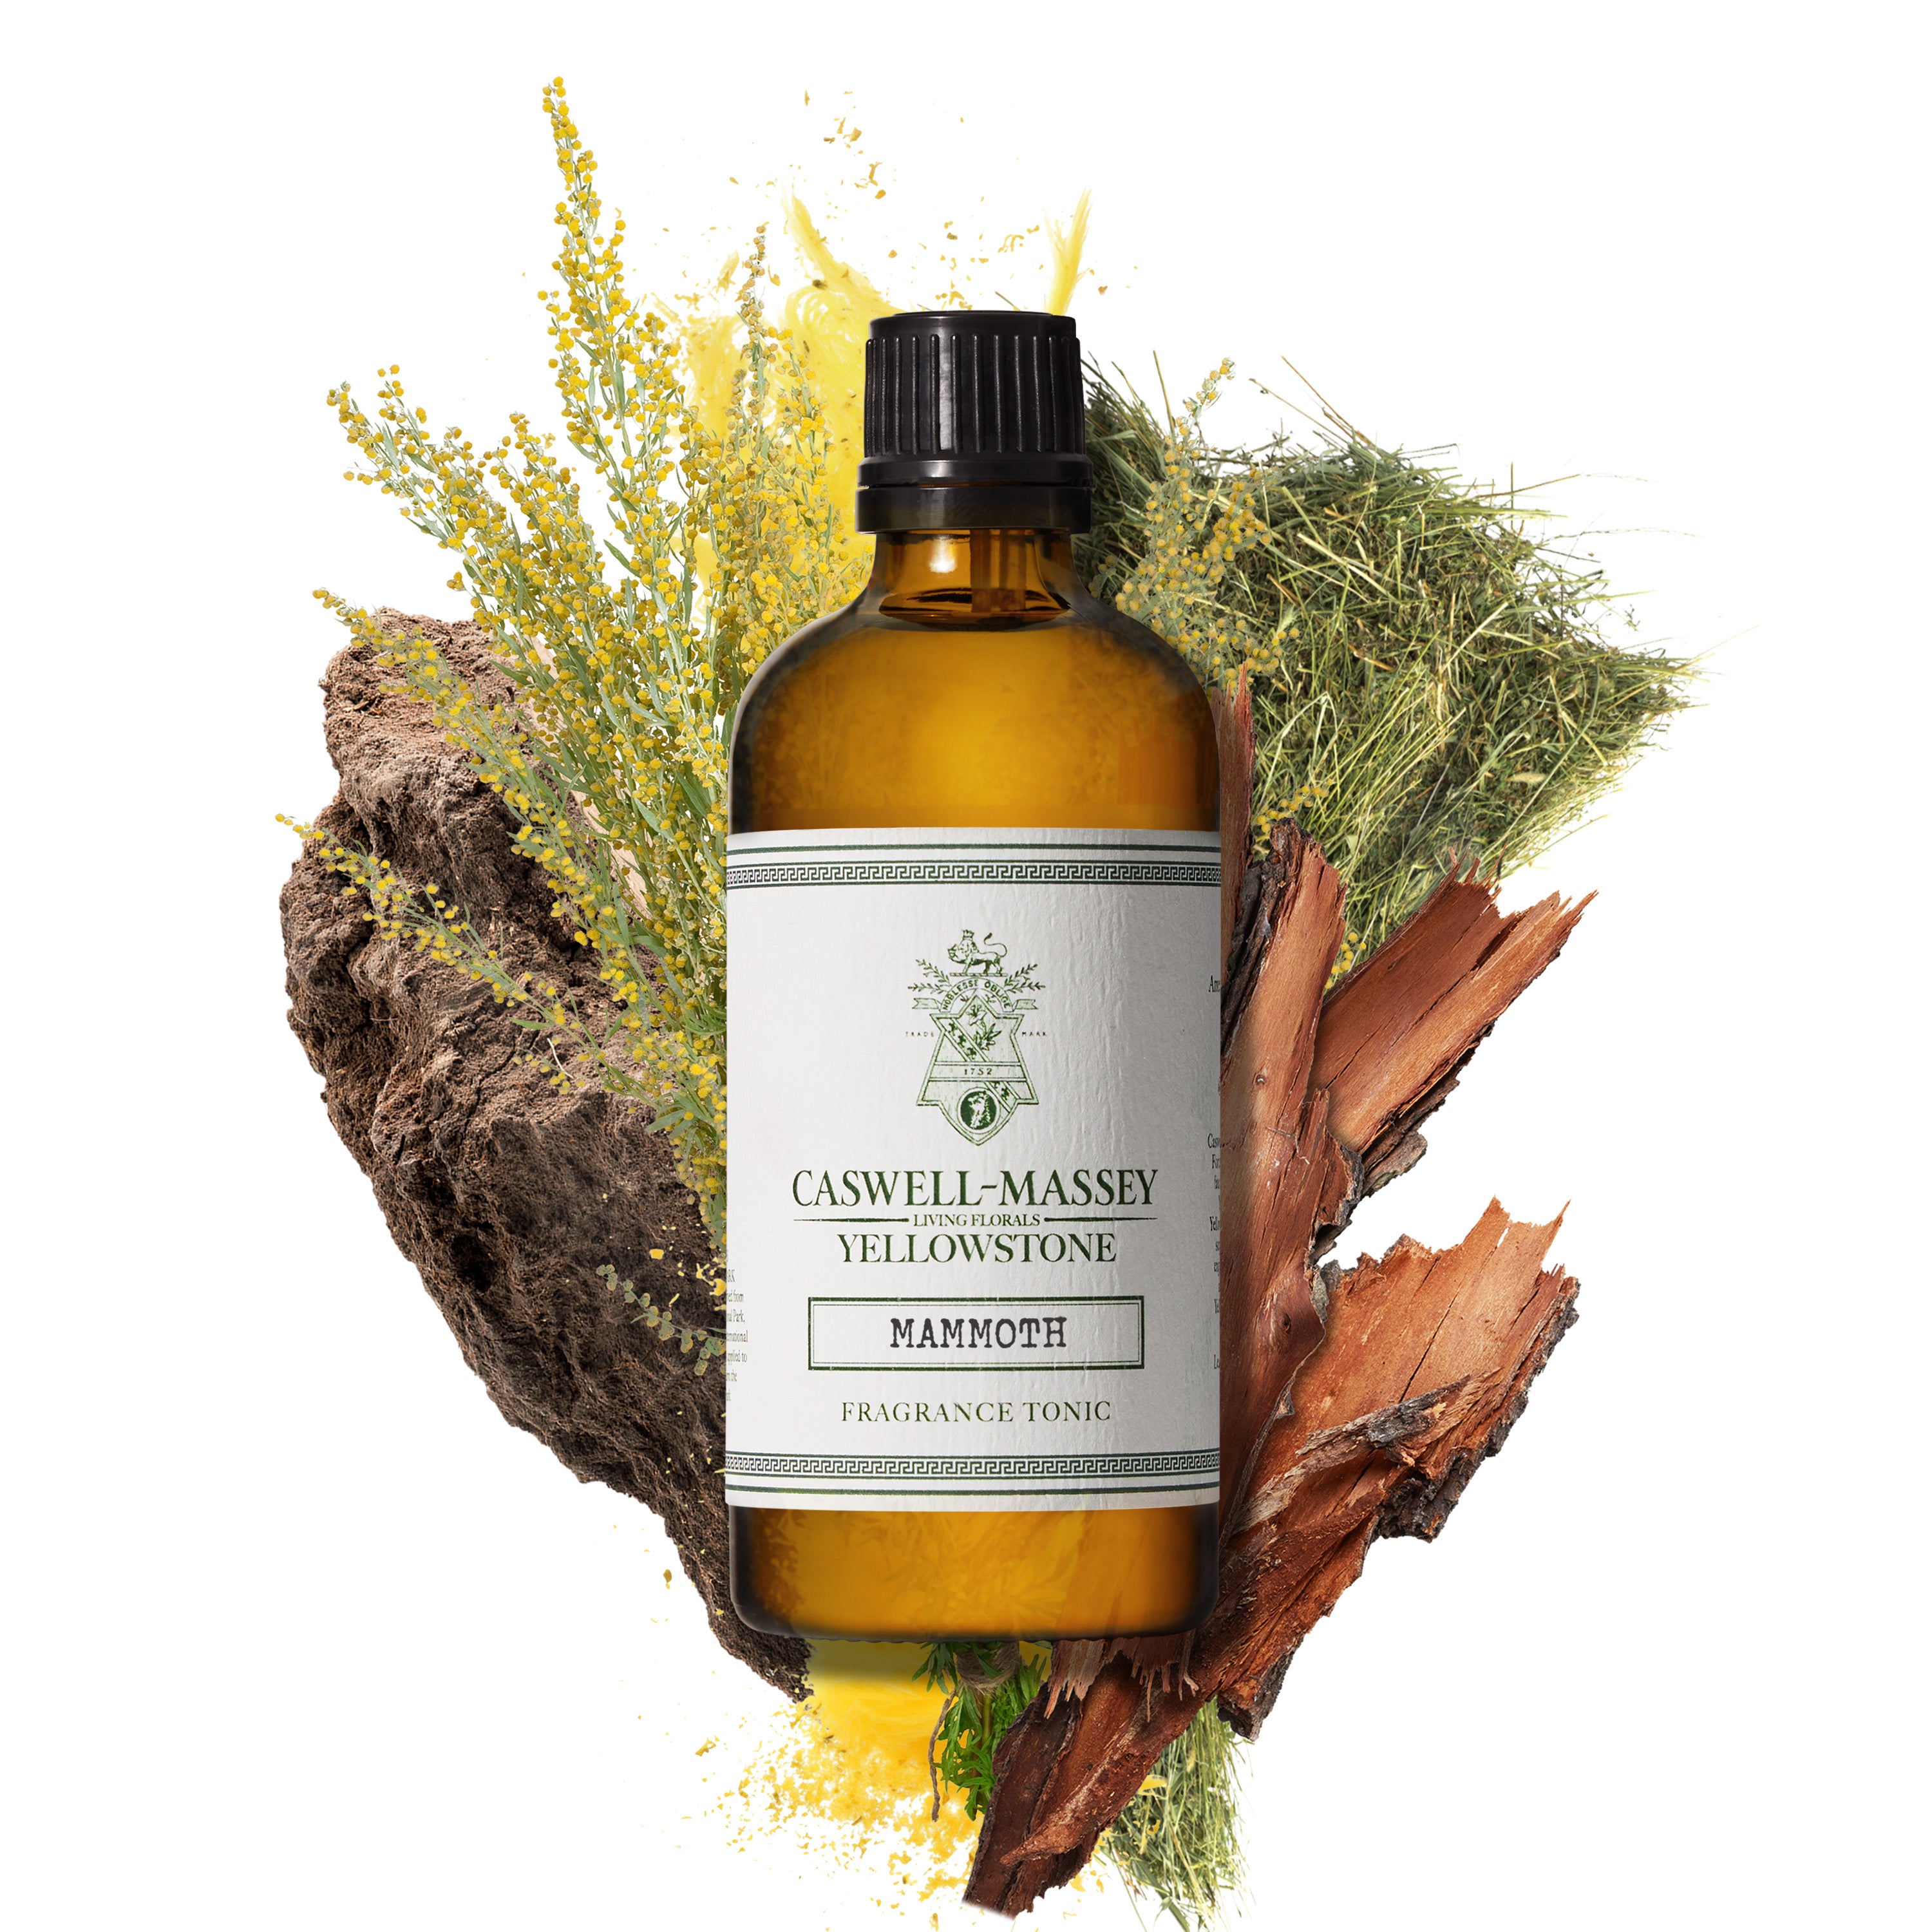 Caswell-Massey Yellowstone Mammoth Fragrance tonic bottle featured over scent notes found in the fragrance including mountain hay, and rich earth